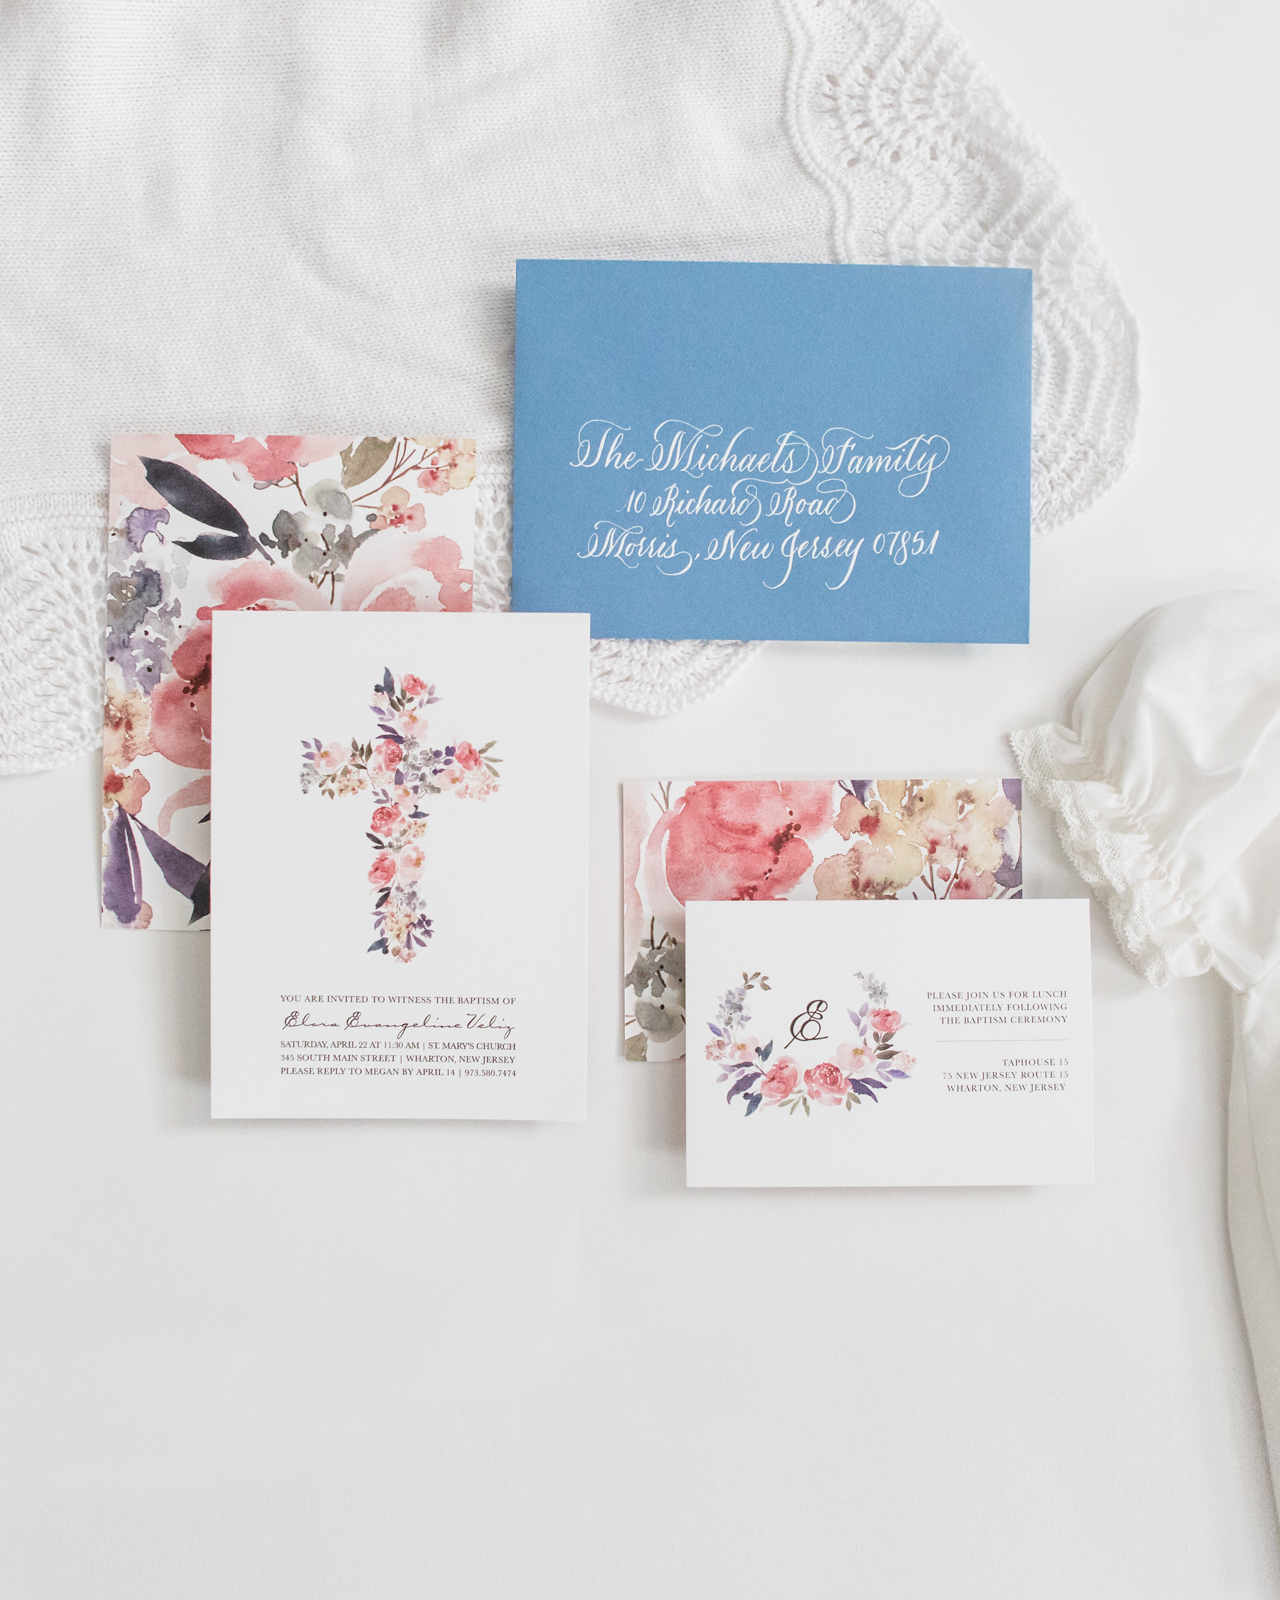 Floral Baptism Invitations by Honeybee Paper Co.